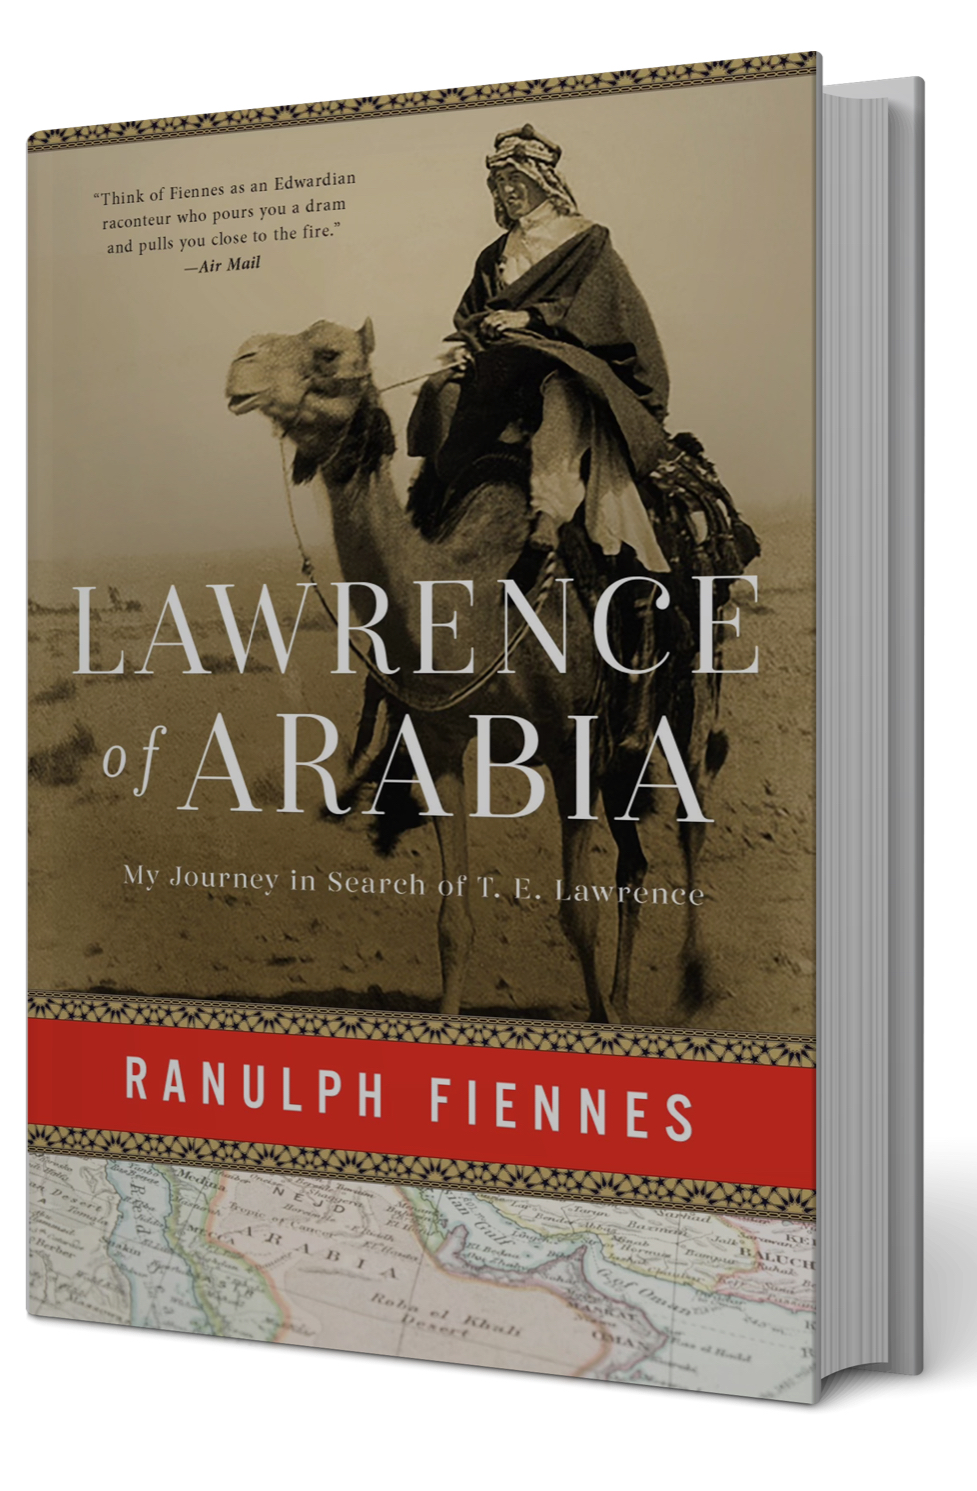 <strong>THE WRITE STUFF</strong><br/><span>Fiennes has written some 30 books, including his latest, a biography of T.E. Lawrence</span>